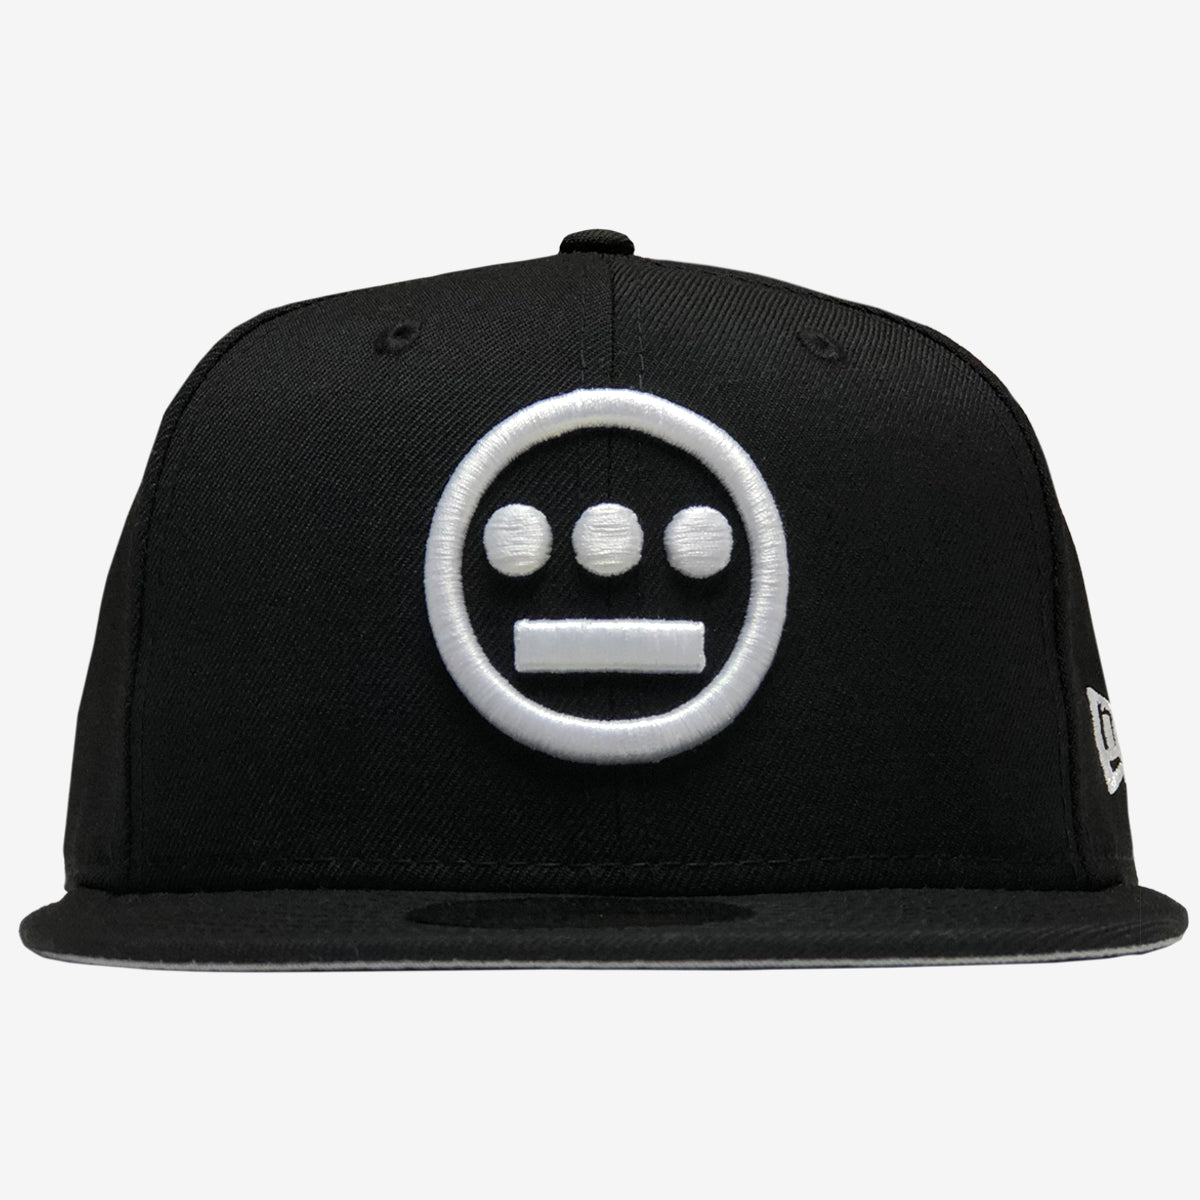 Black cap with white embroidered Hieroglyphics hip-hop logo on the crown.